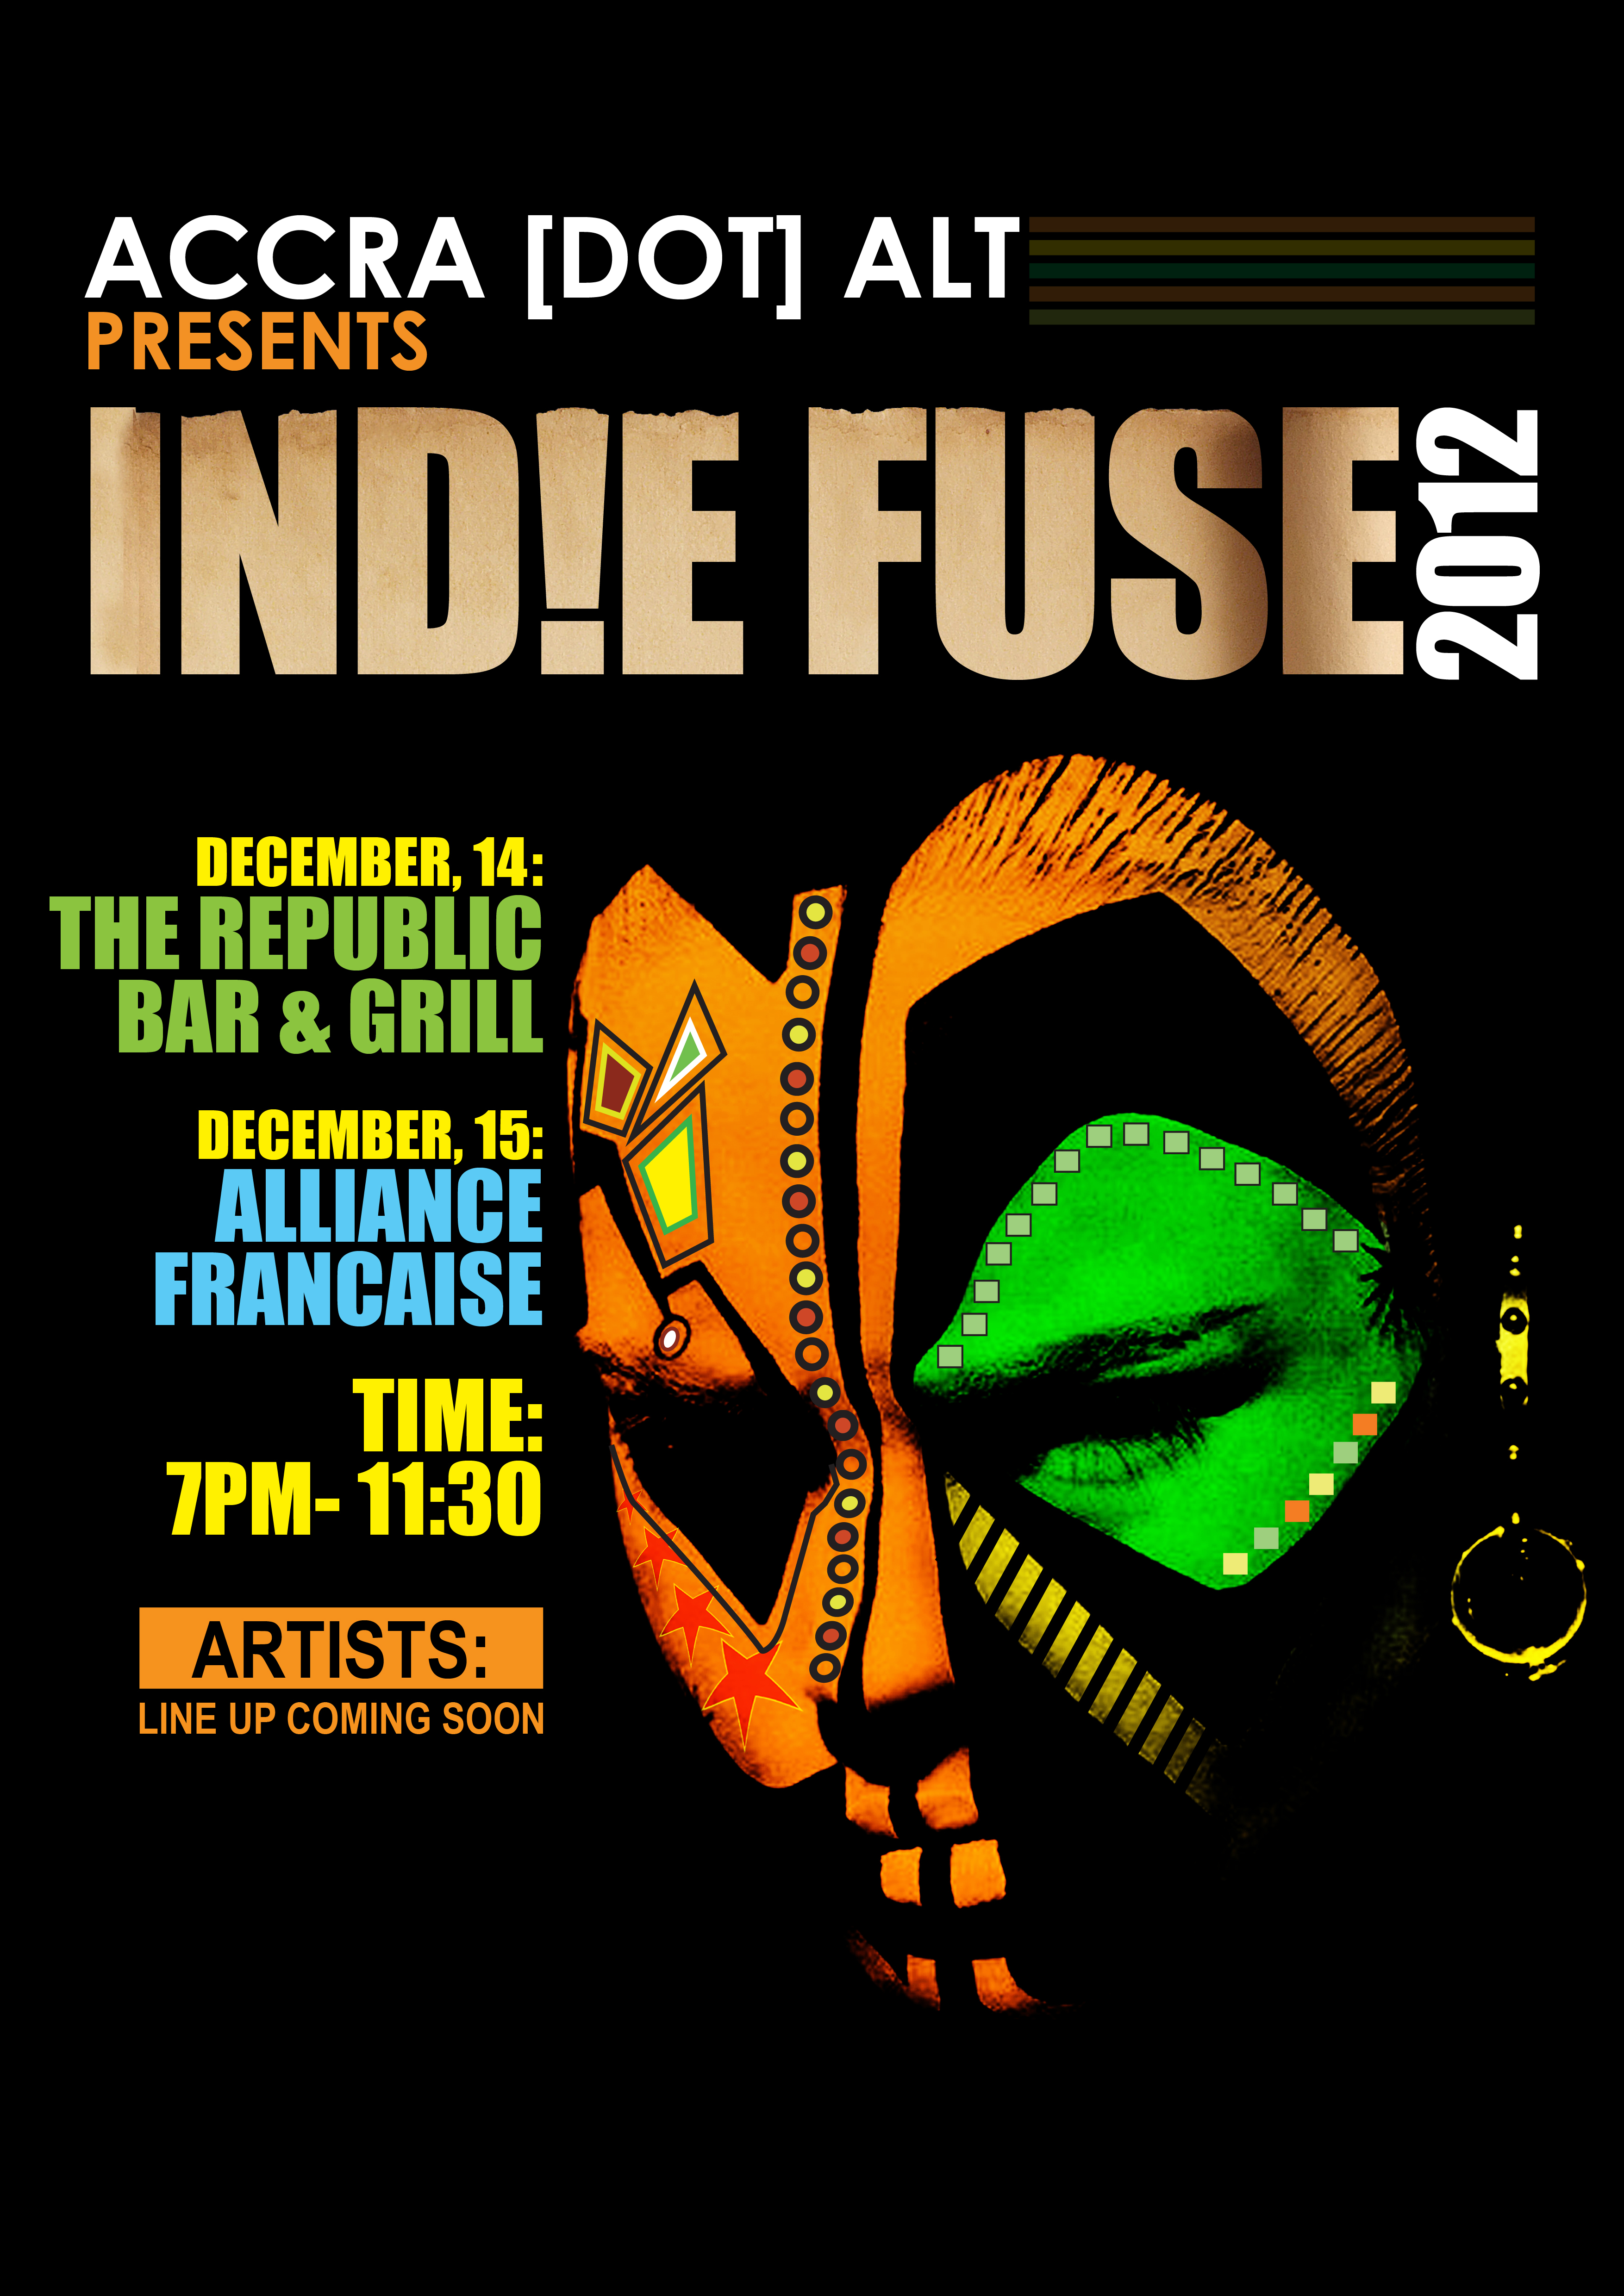 IND!E FUSE 2012: LIVE ELECTRO MUSIC SHAKE UP IN ACCRA, DECEMBER 14TH &15TH